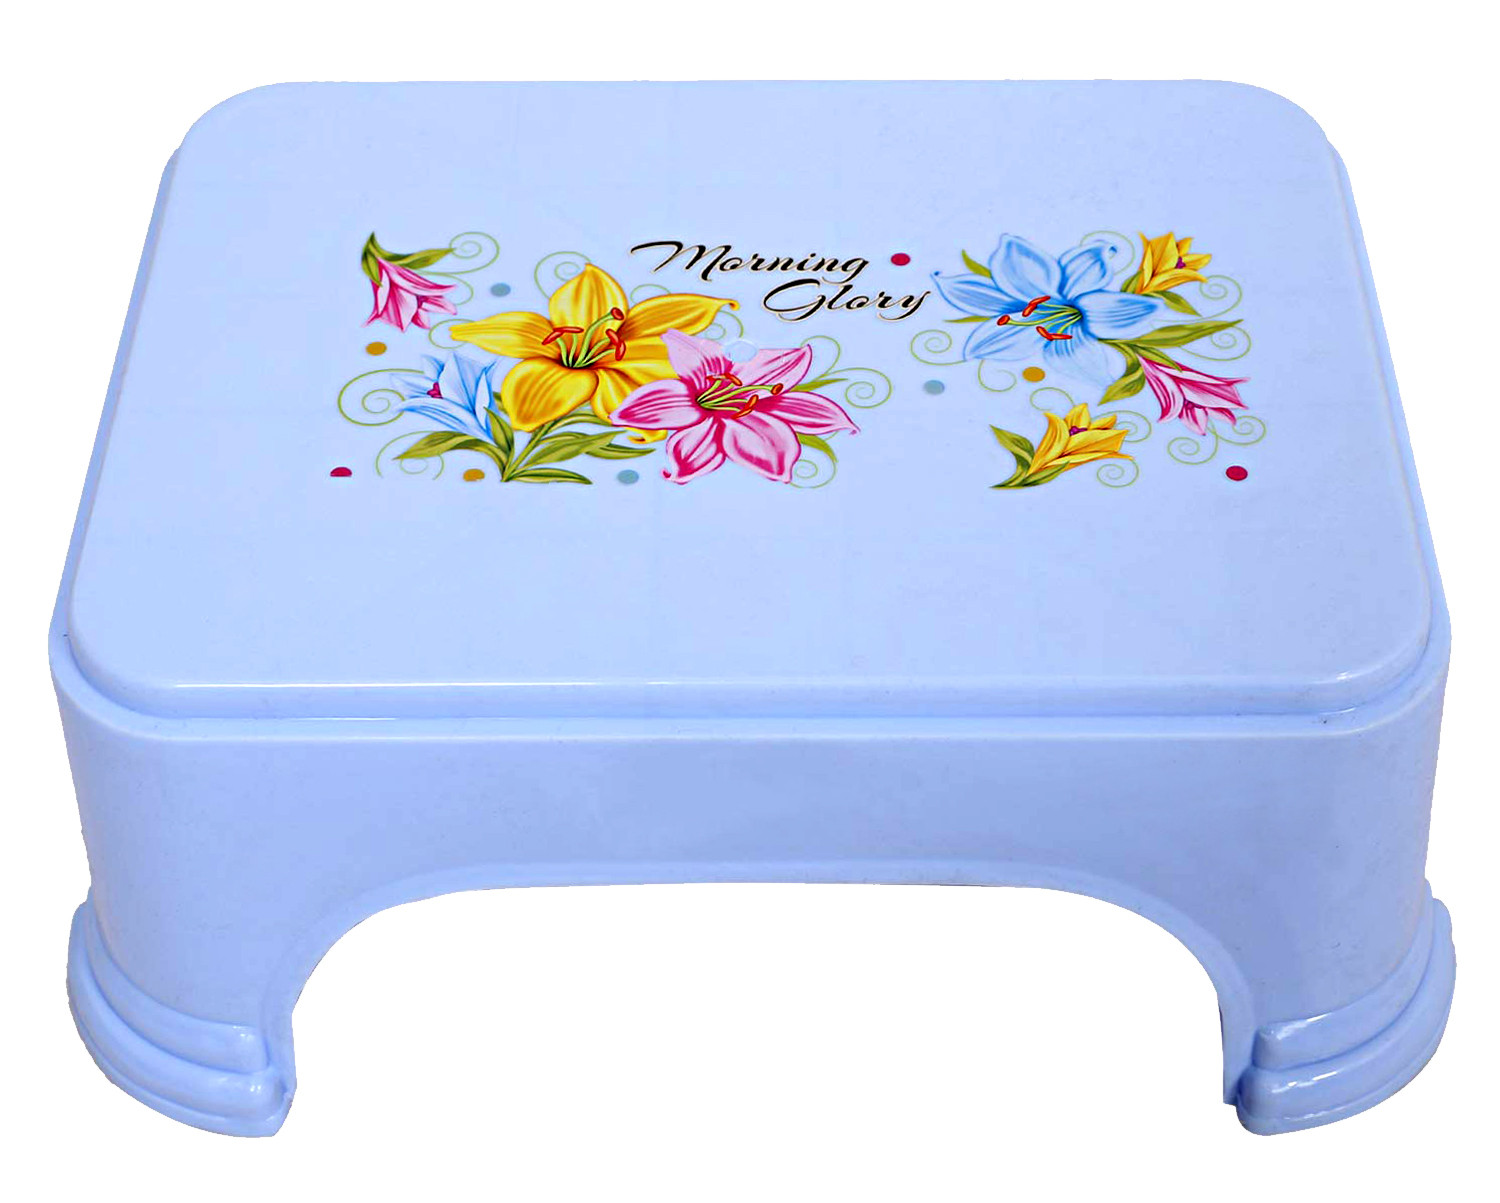 Kuber Industries Floral Print 3 Pieces Plastic Bathroom Stool, Adults Simple Style Stool Anti-Slip with Strong Bearing Stool for Home, Office, Kindergarten, Pink,Blue & White